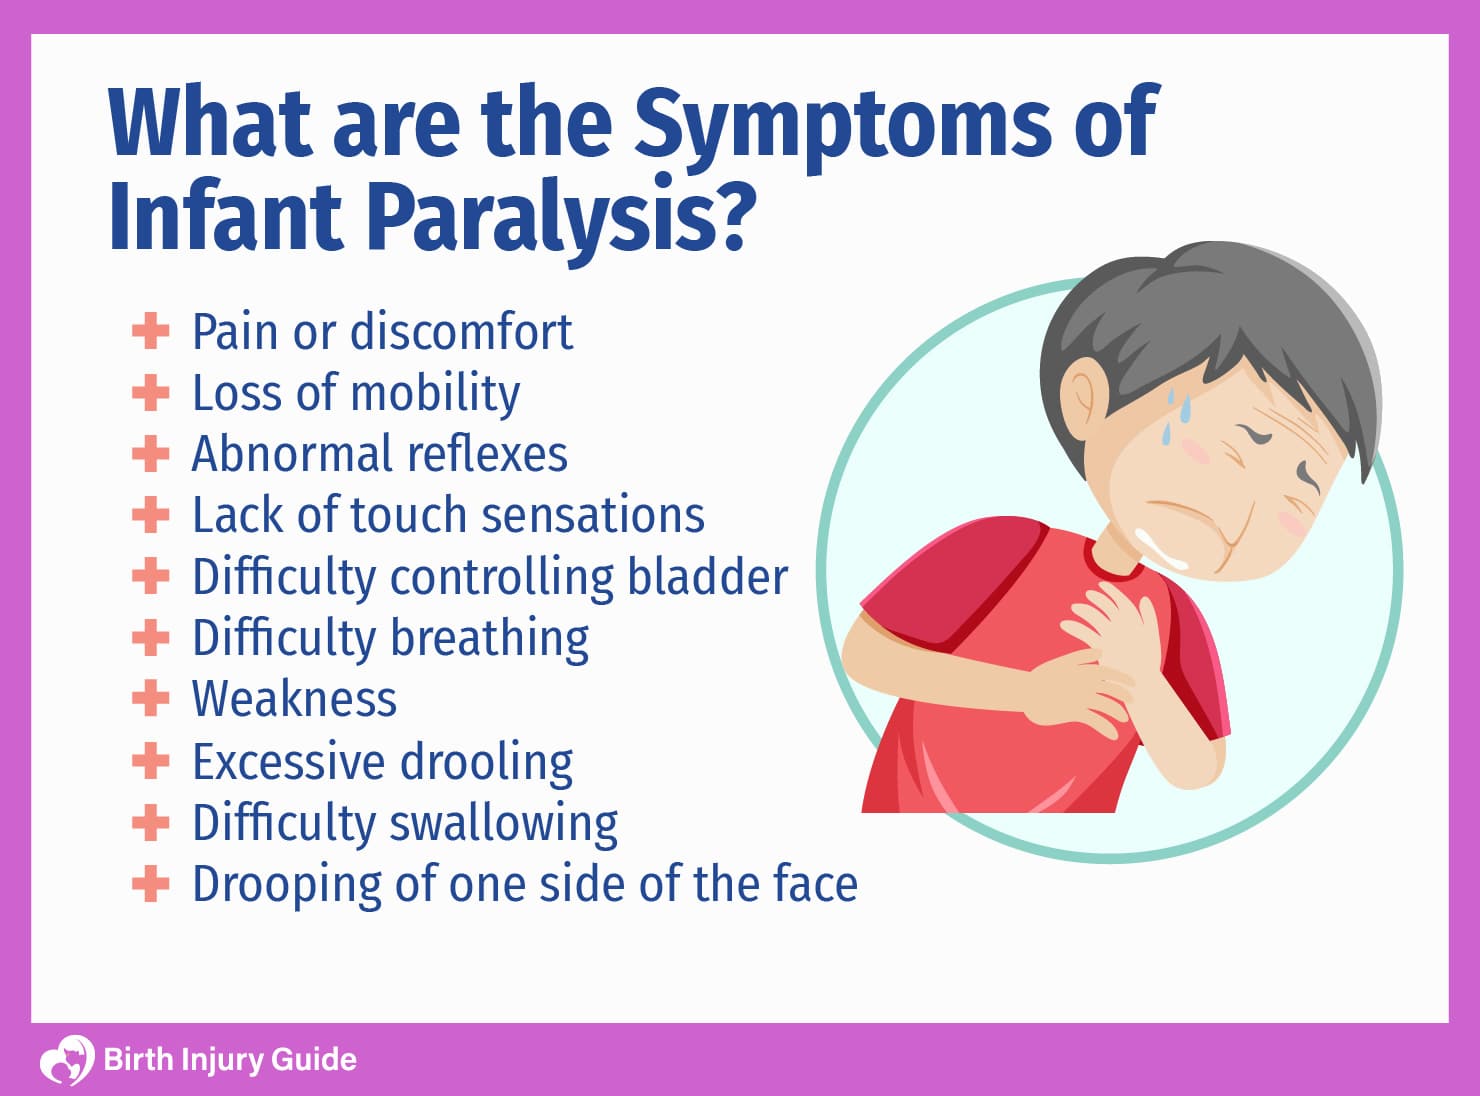 what are the symptoms of infant paralysis?